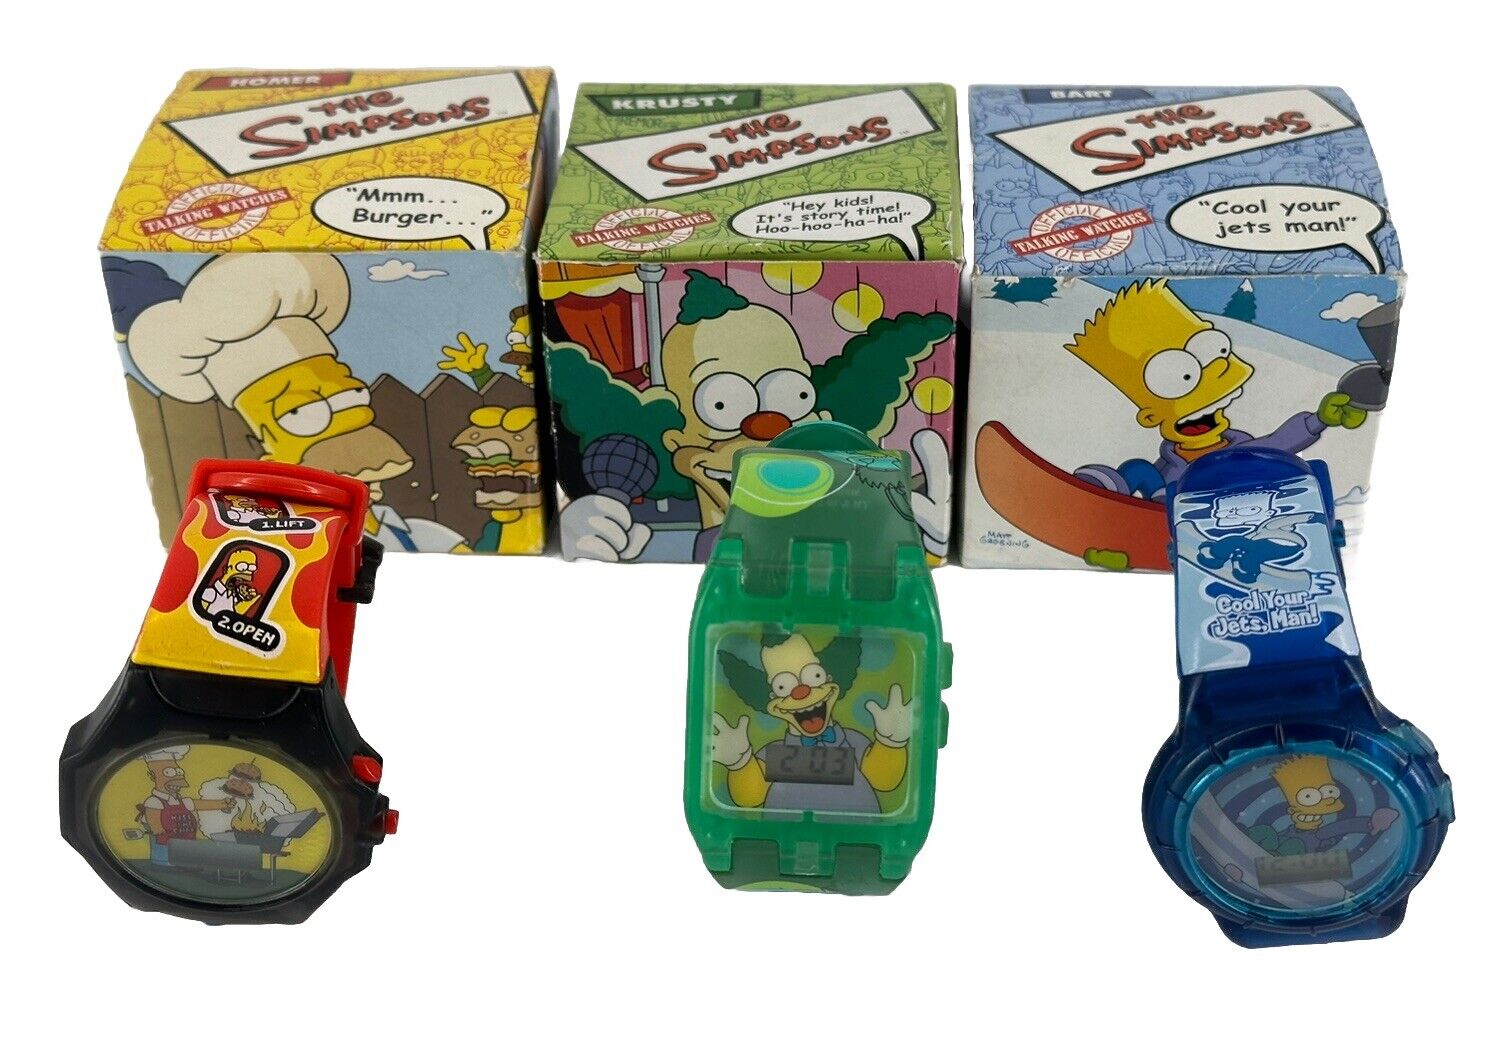 The Simpsons - talking watches 2002 SET OF 3 - Burger King collectible NEW